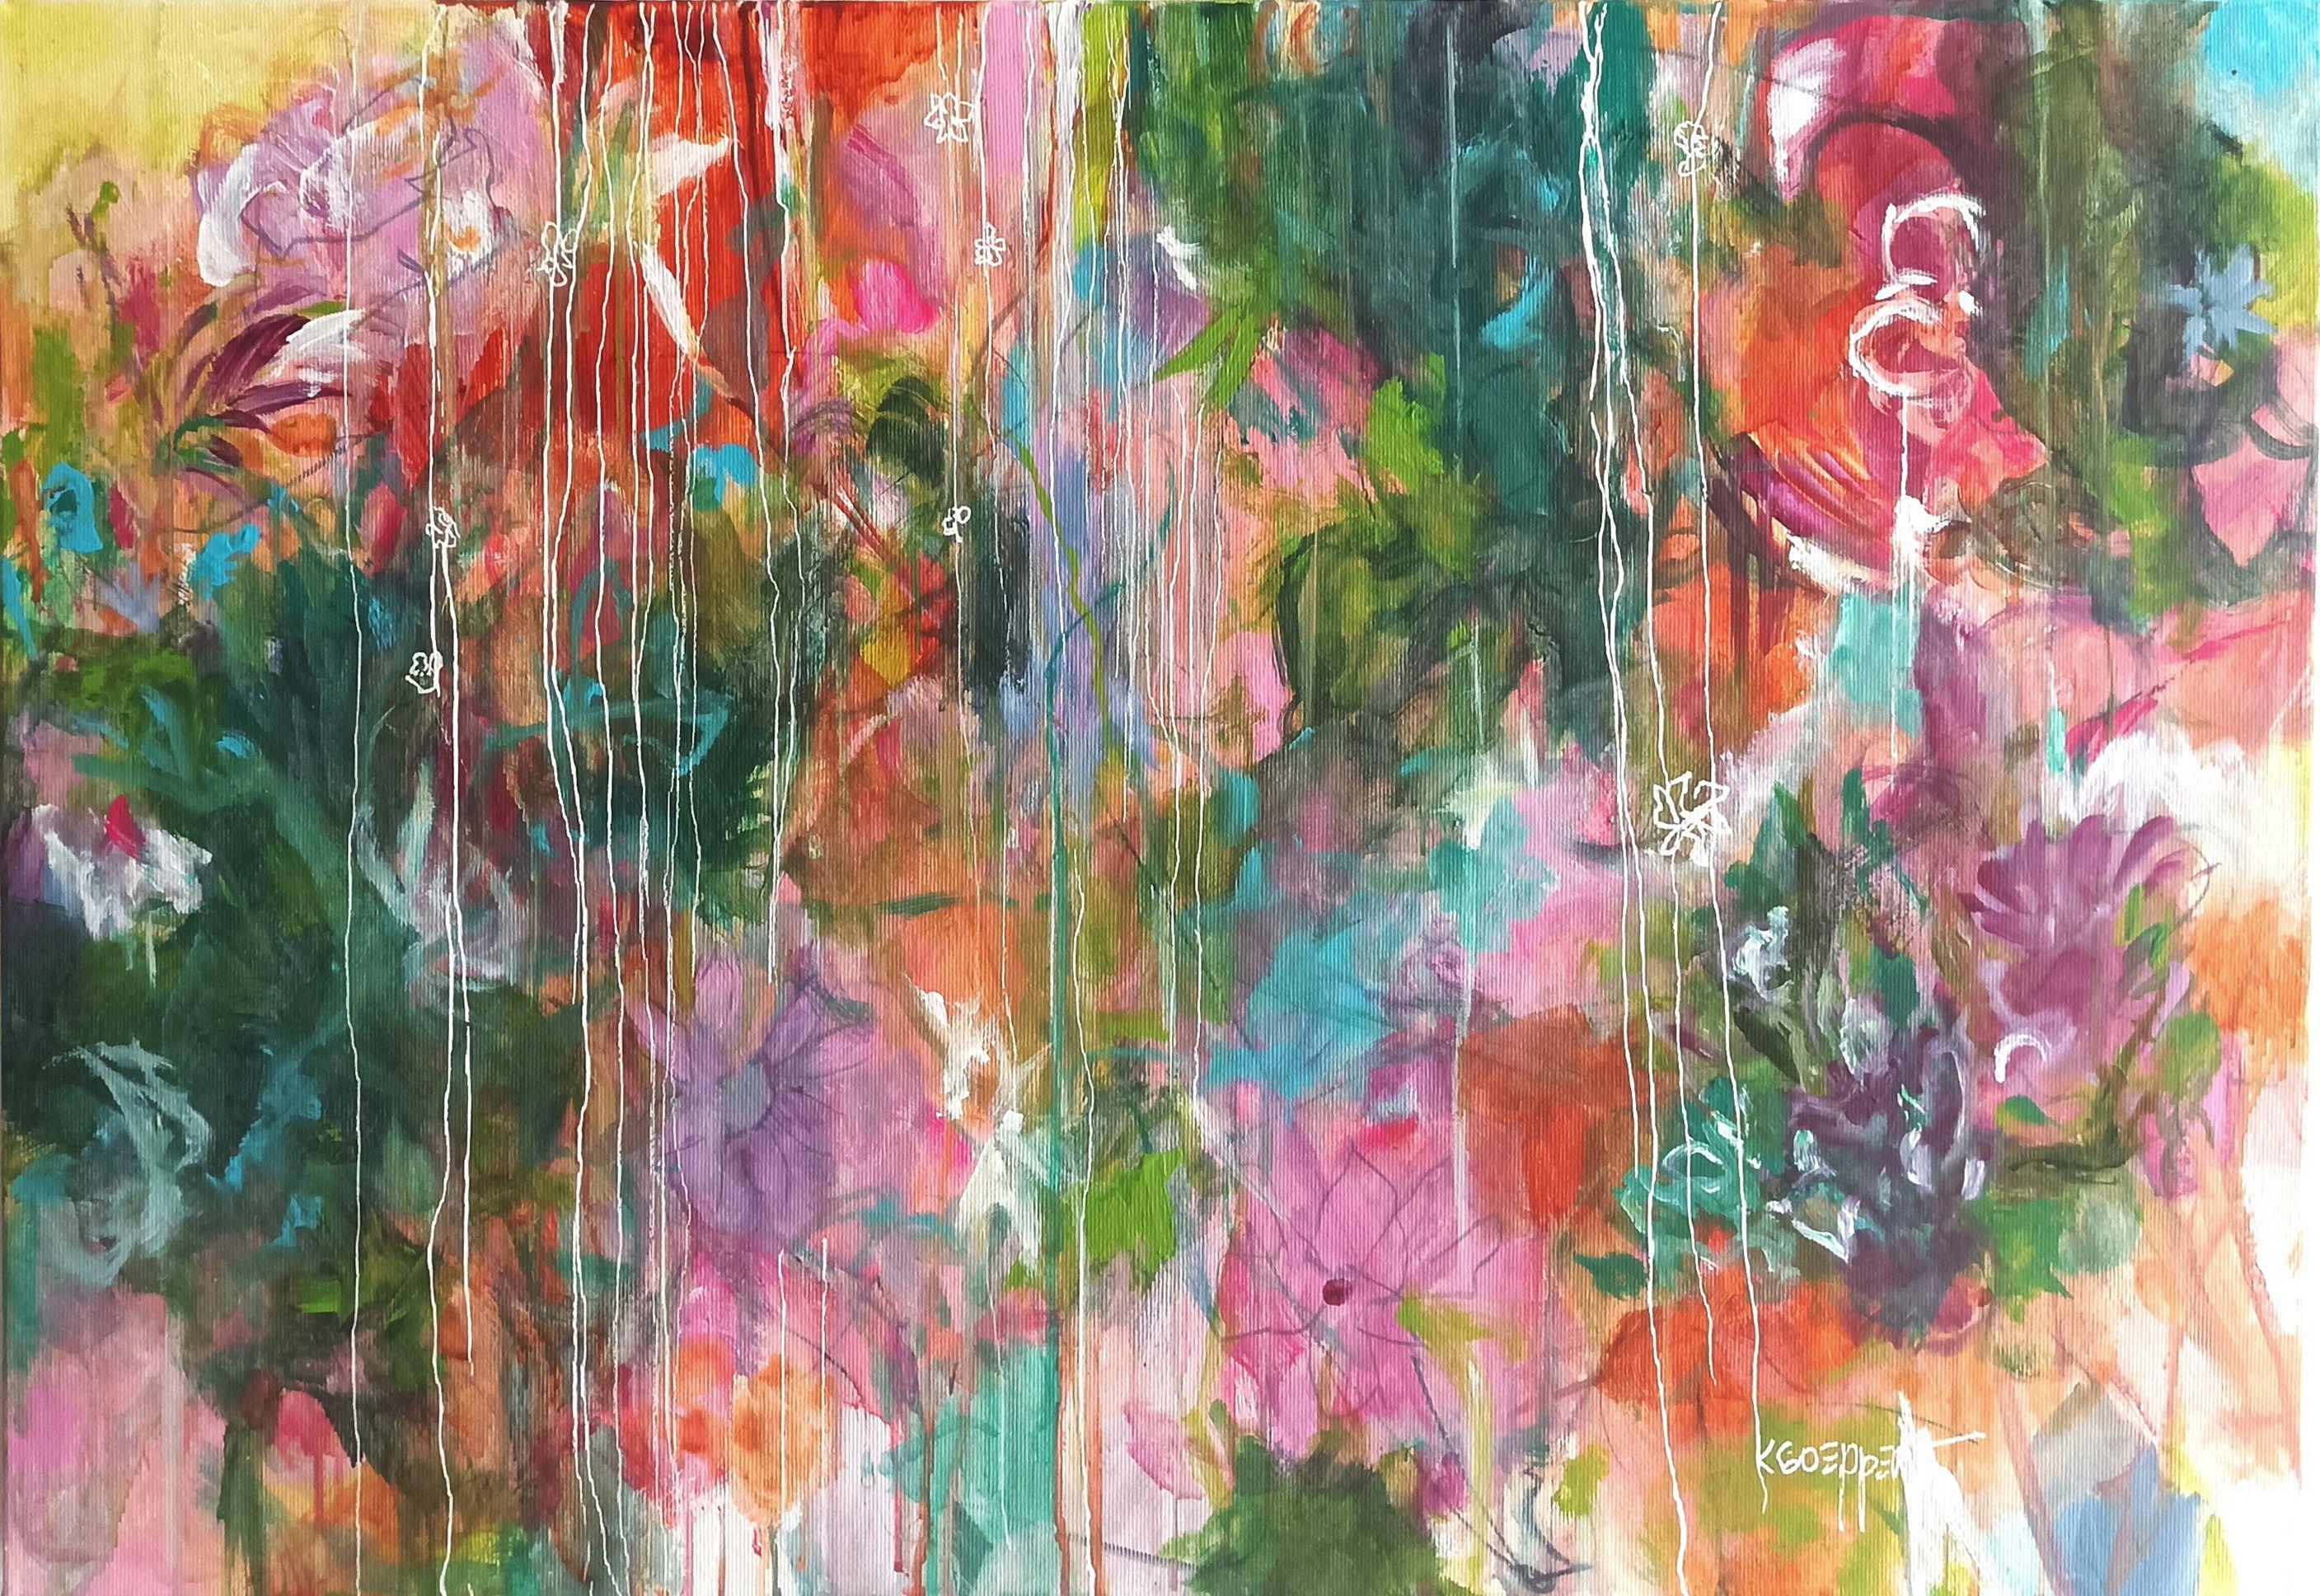 A bright painting on canvas - ready to hang.  The work is inspired by nature and the warm glow of autumn. It's playful and colourful.    The sides of the work are painted.    70 x 50 x 4 cm / 27.6 x 19.7 x 1.6 in :: Painting :: Impressionist :: This